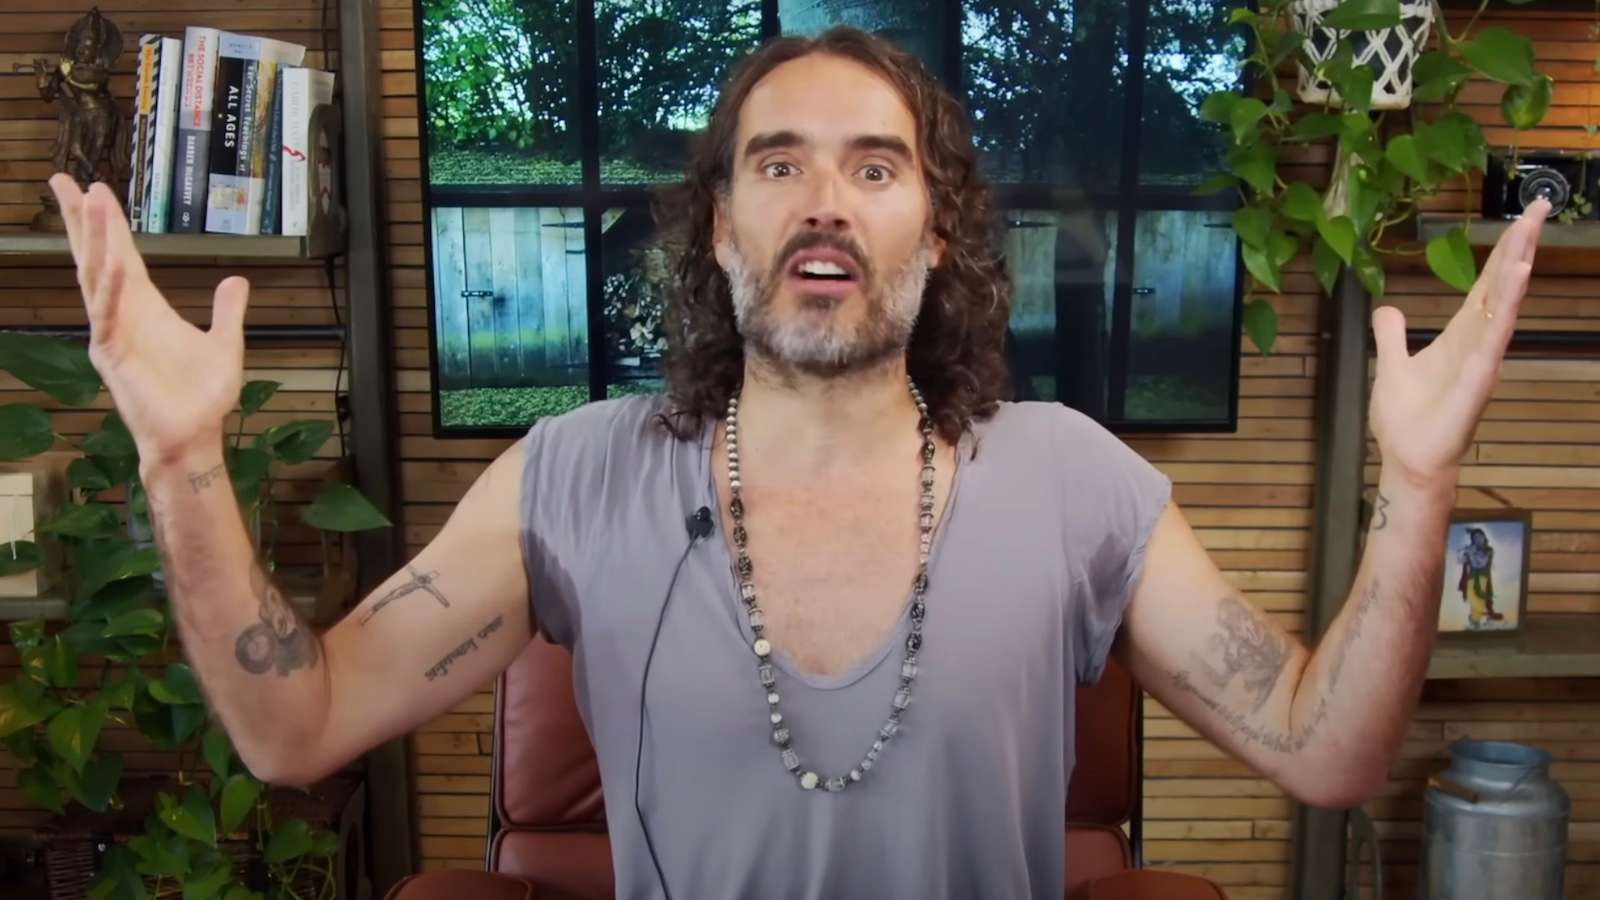 Russell Brand in a recent YouTube video